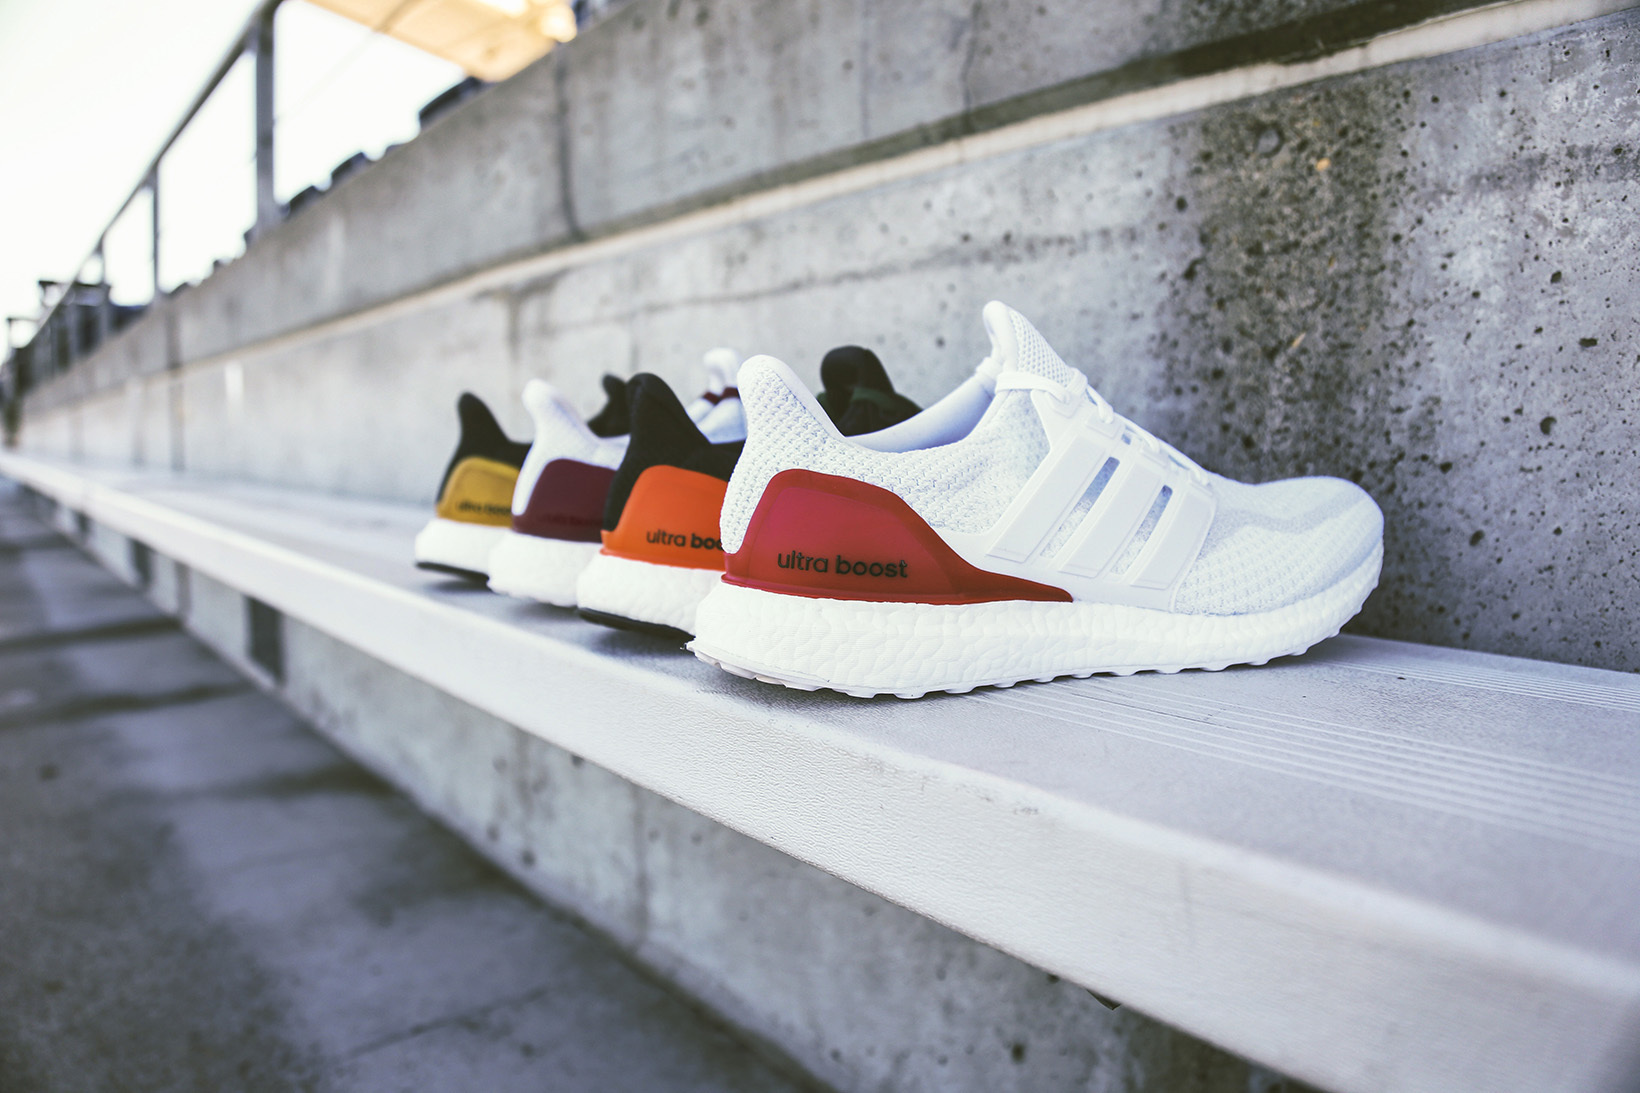 New NCAA colourways for Adidas UltraBoost